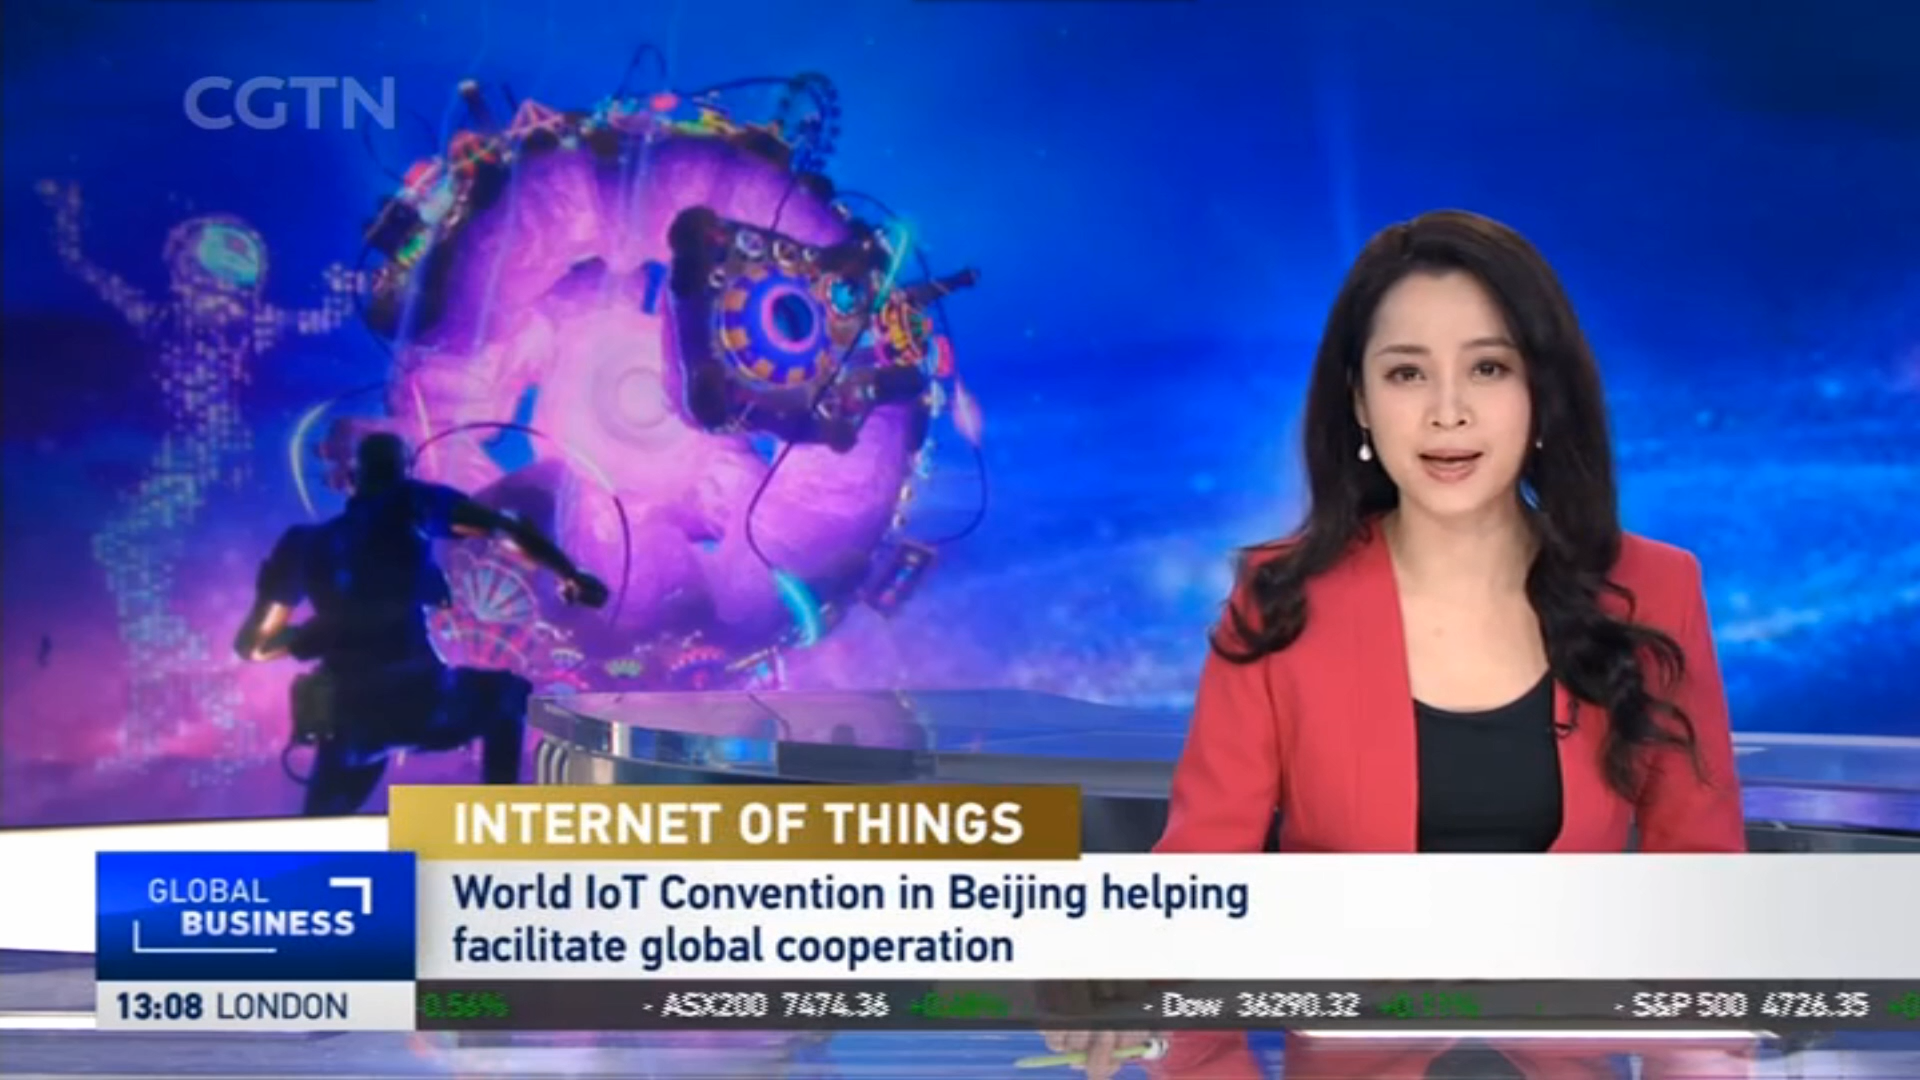 [CGTN] Internet of Things: World IoT Convention in Beijing helping facilitate global cooperation